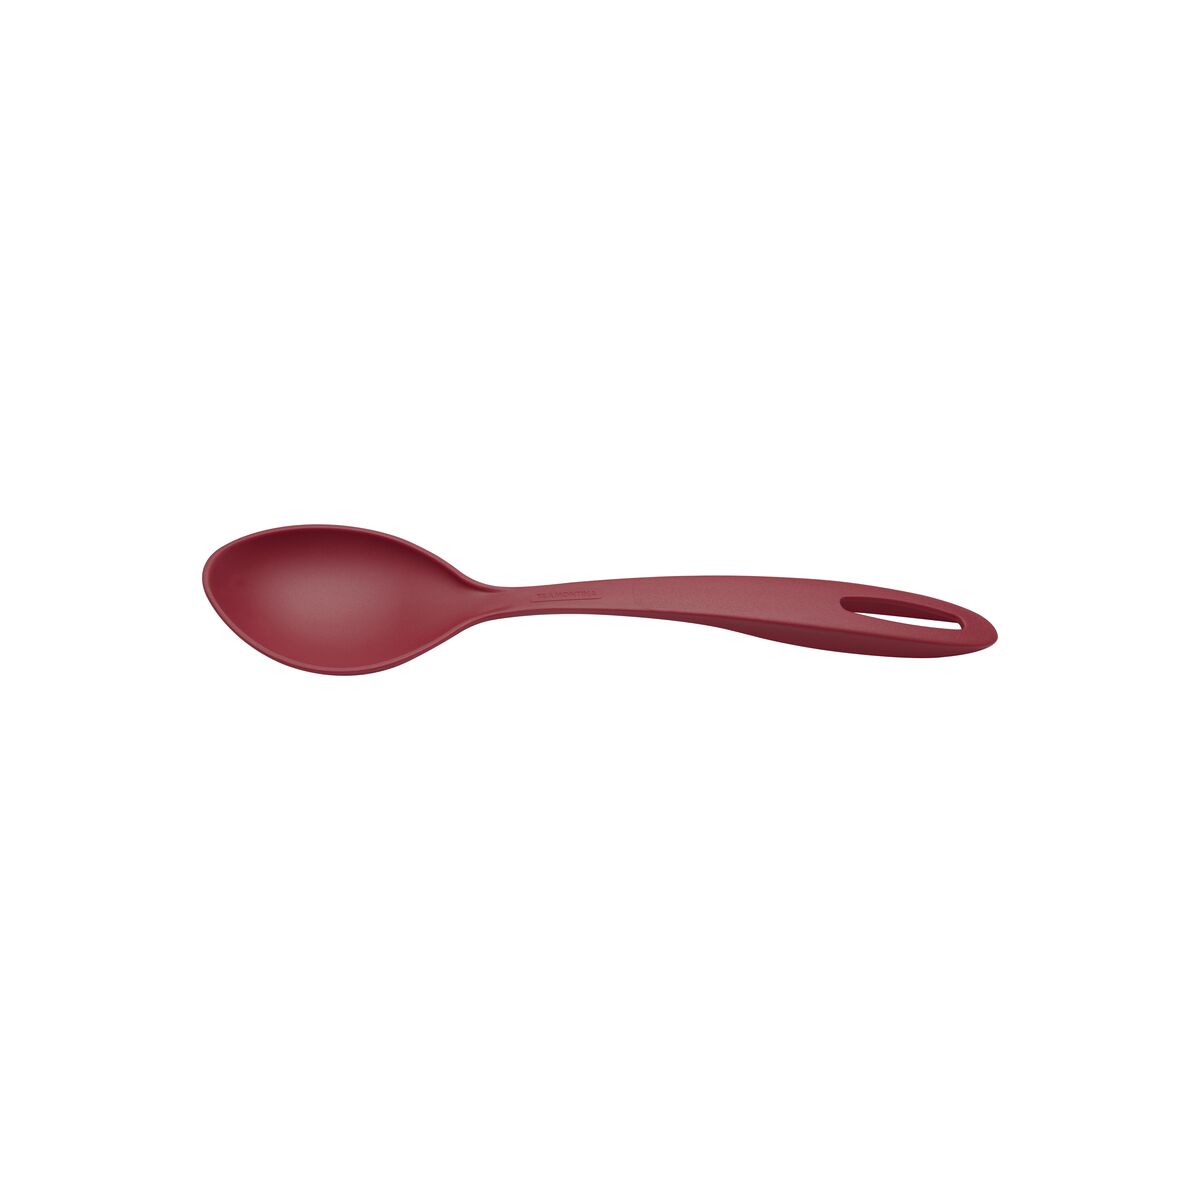 Tramontina Ability Red Nylon Serving Spoon